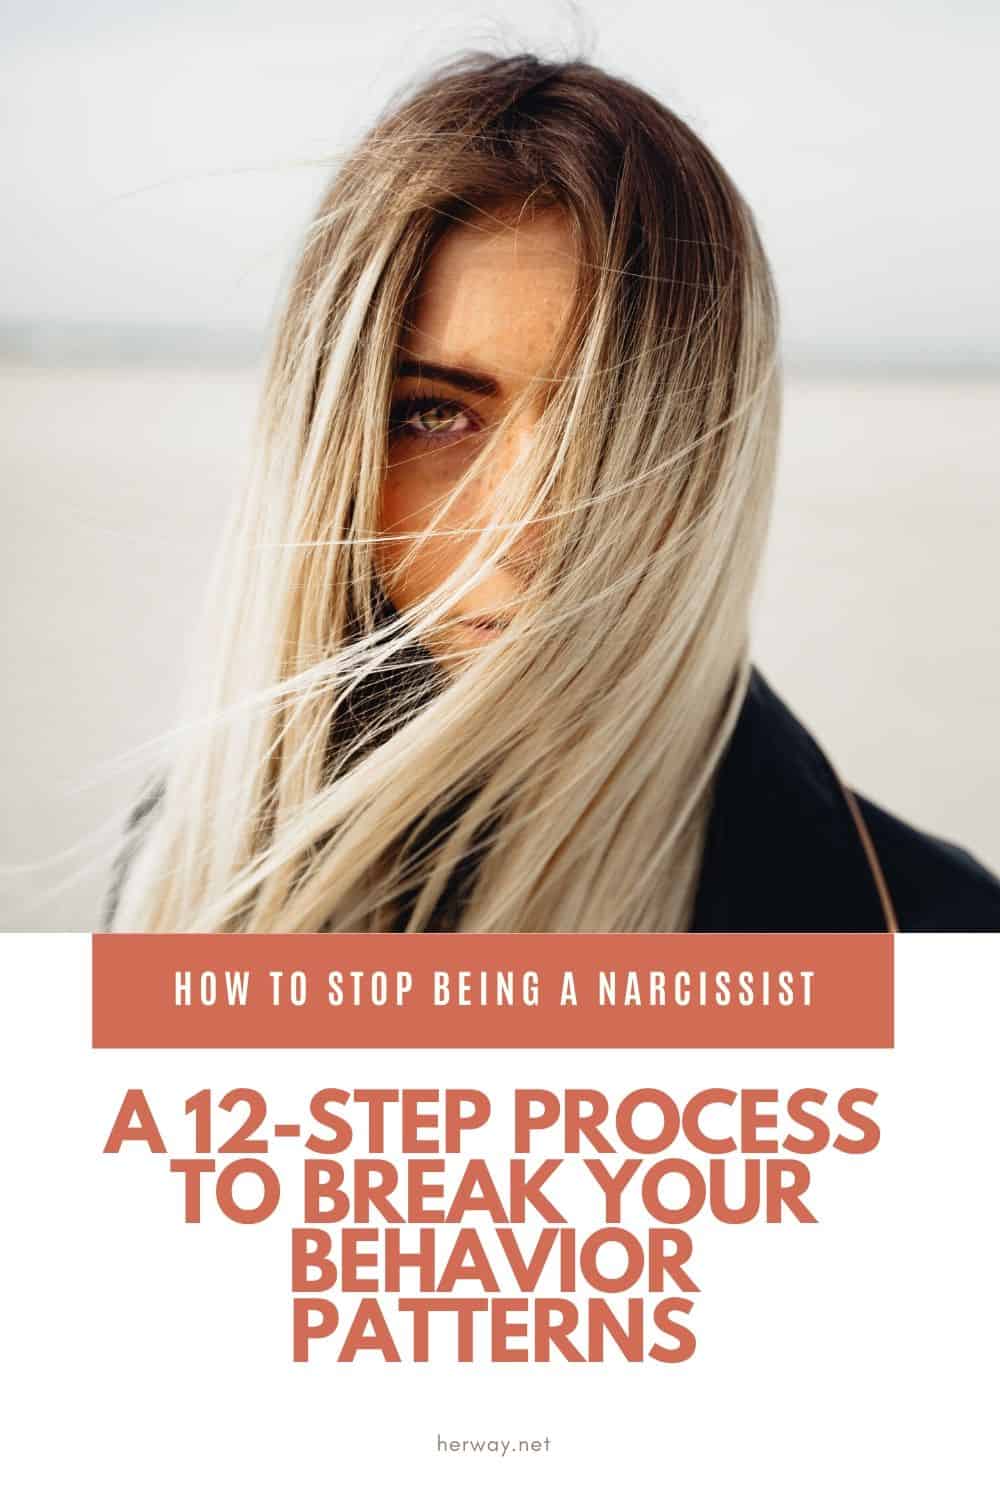 How To Stop Being A Narcissist A 12-Step Process To Break Your Behavior Patterns